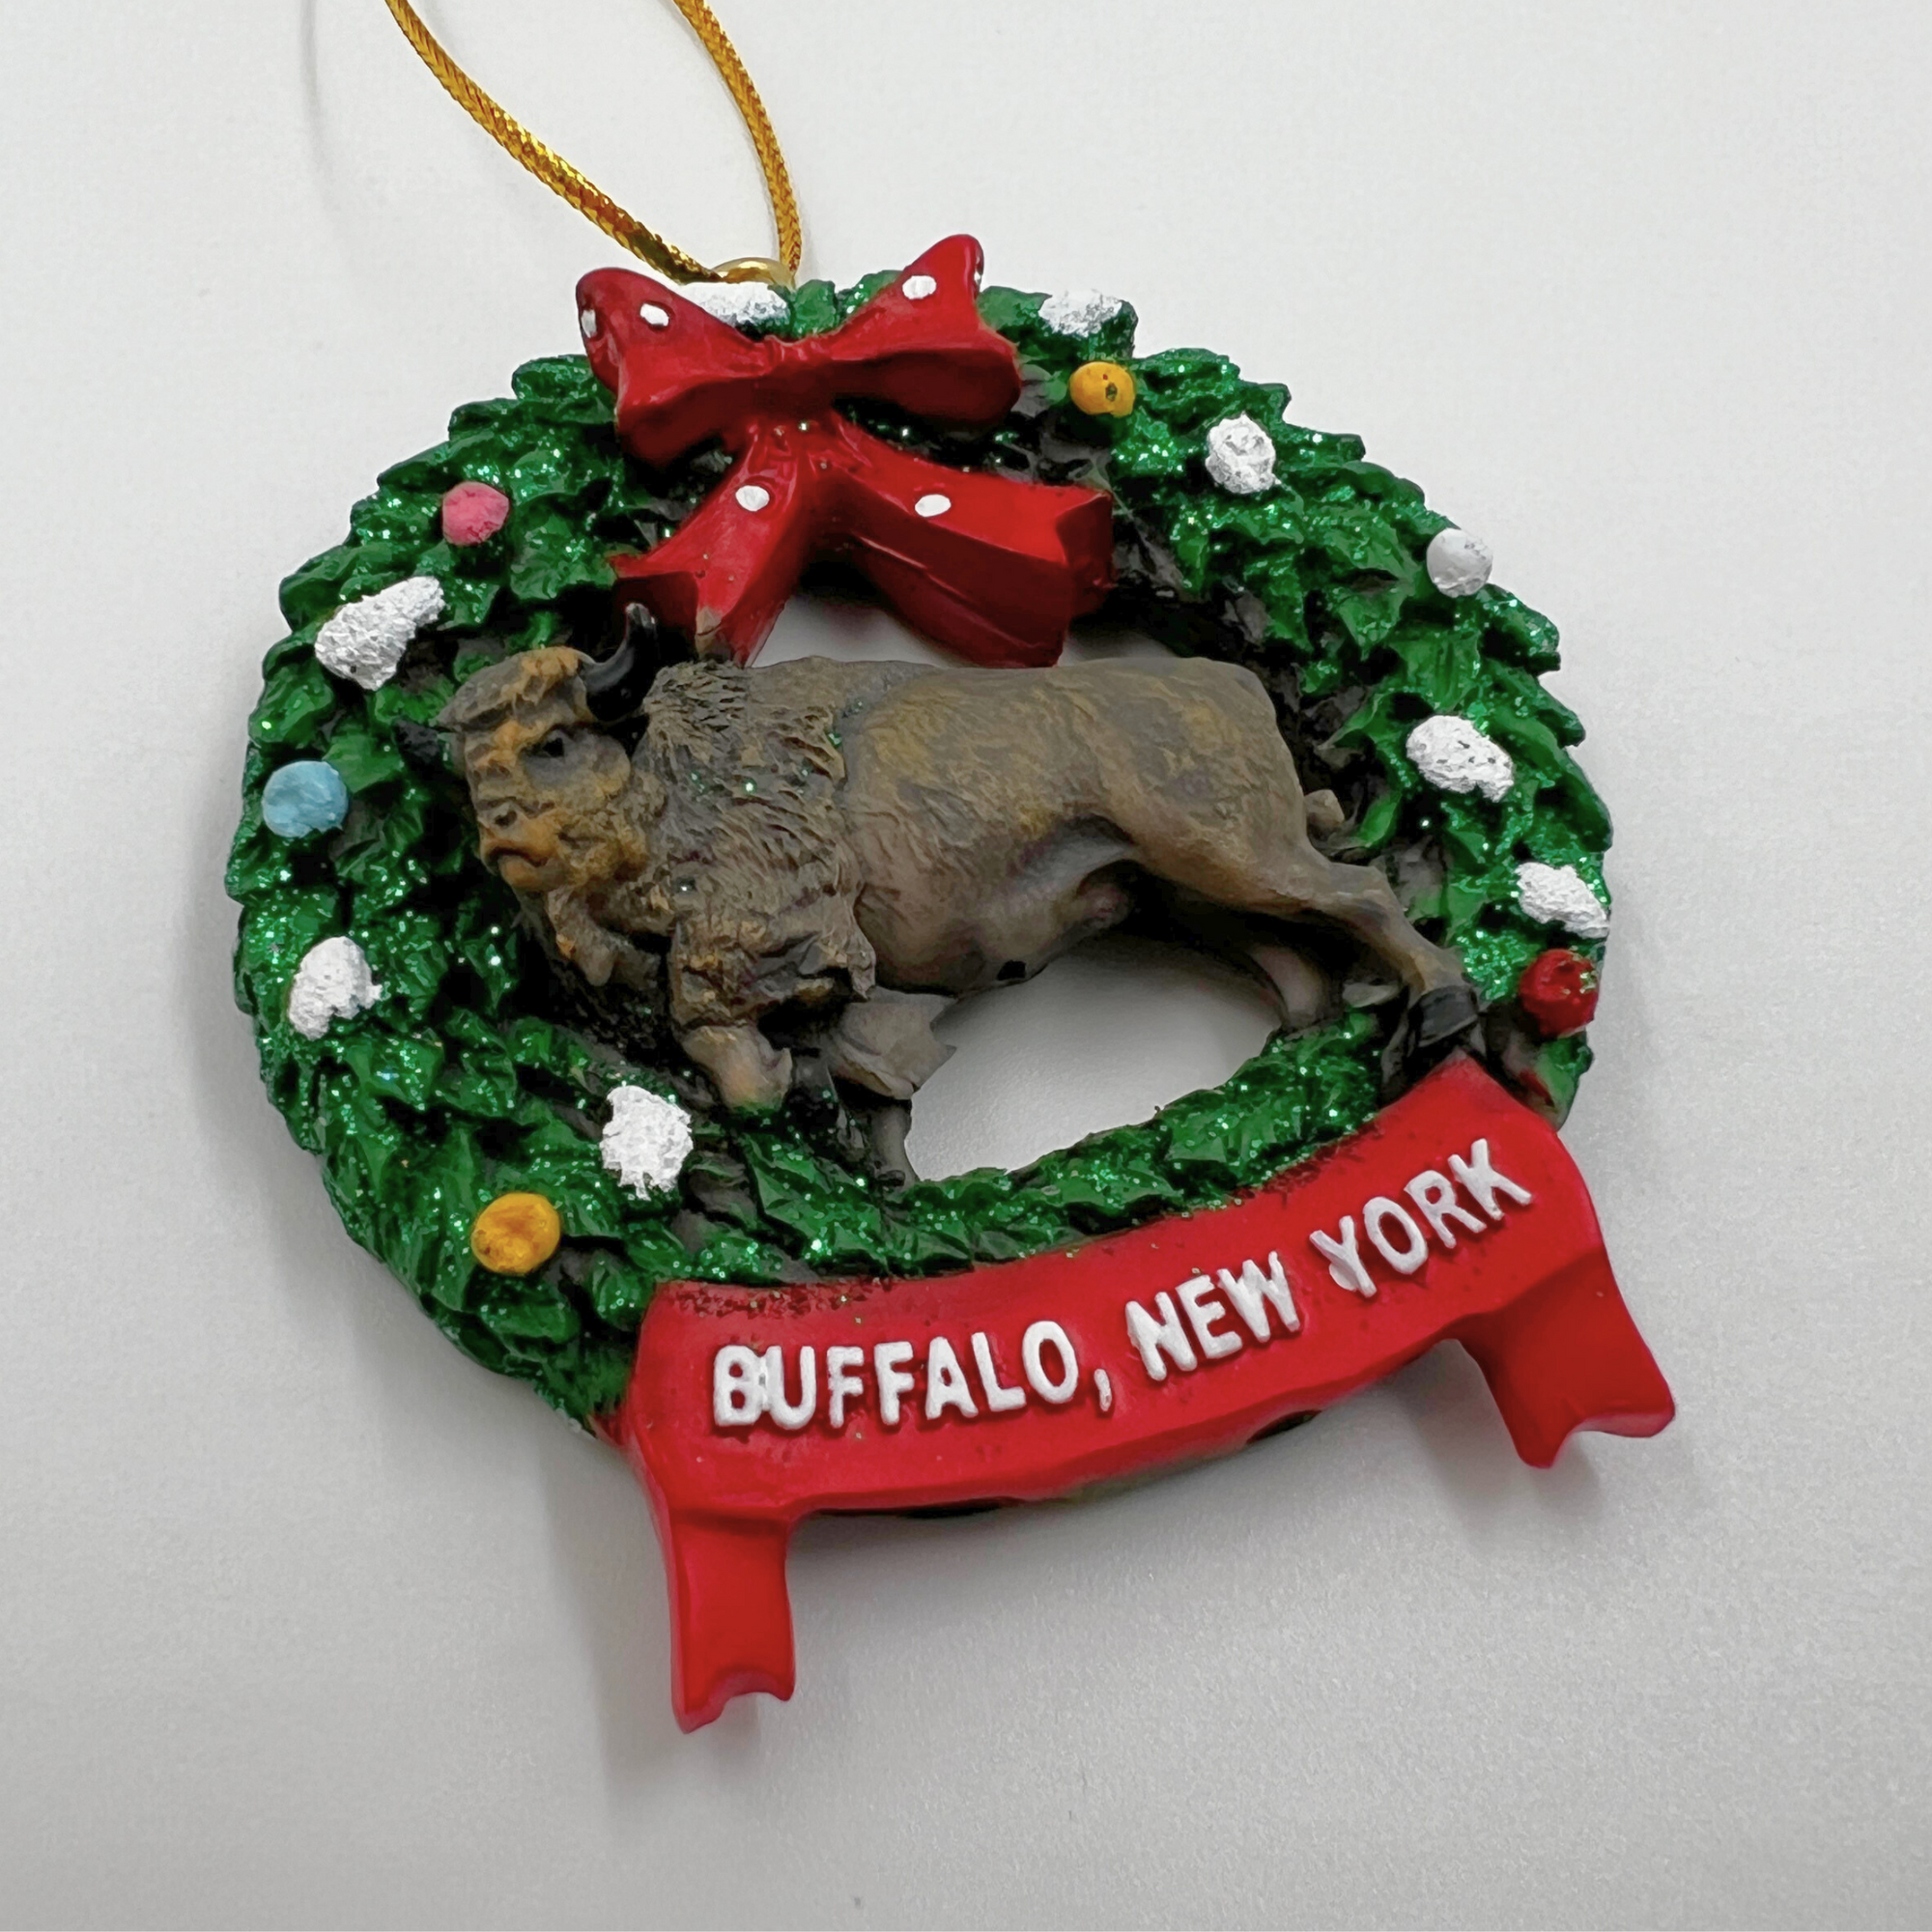 Bison in Wreath Buffalo, NY Holiday Ornament